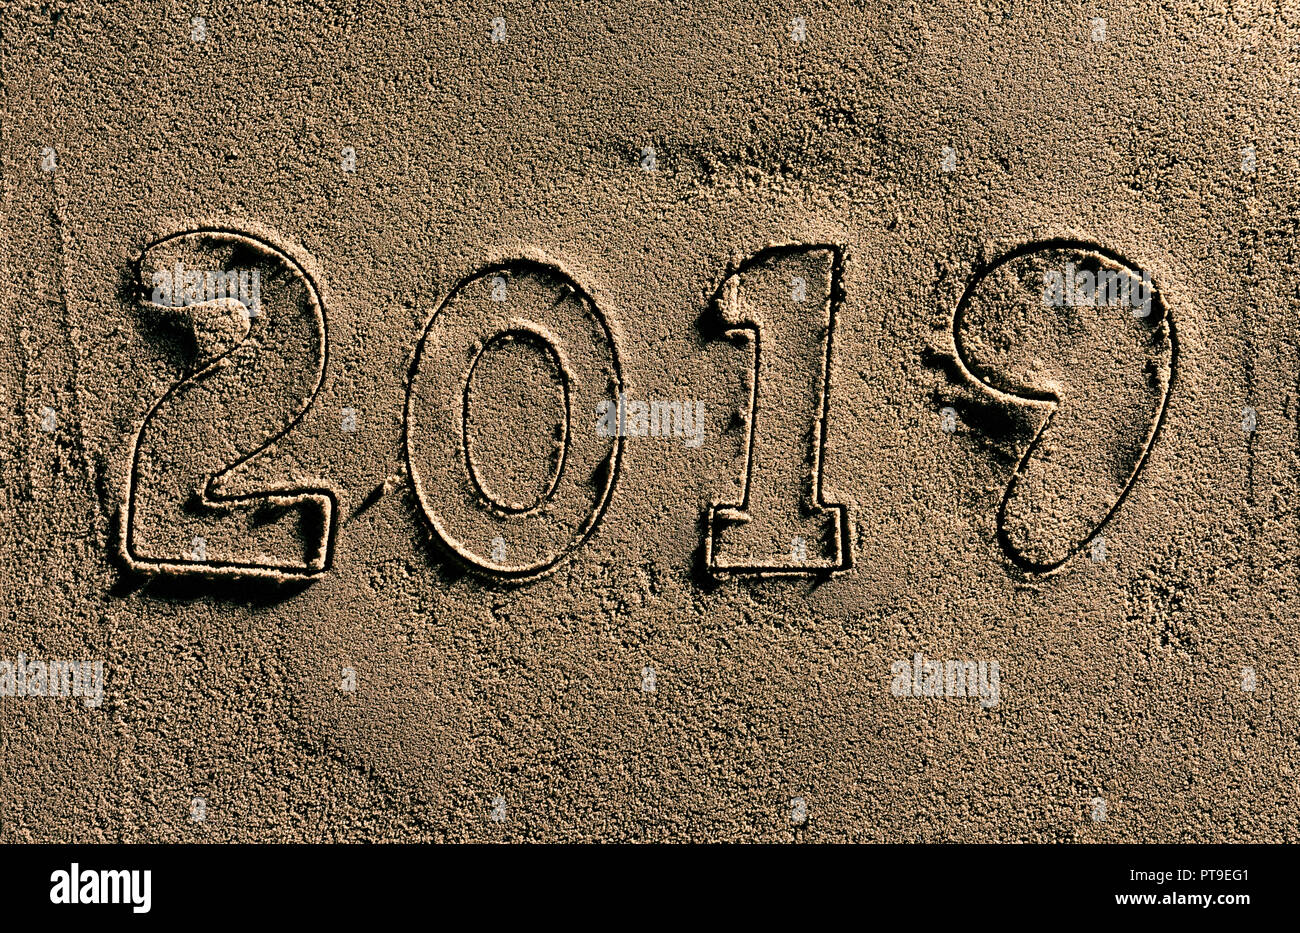 The year 2019 cut into wet sand. Stock Photo